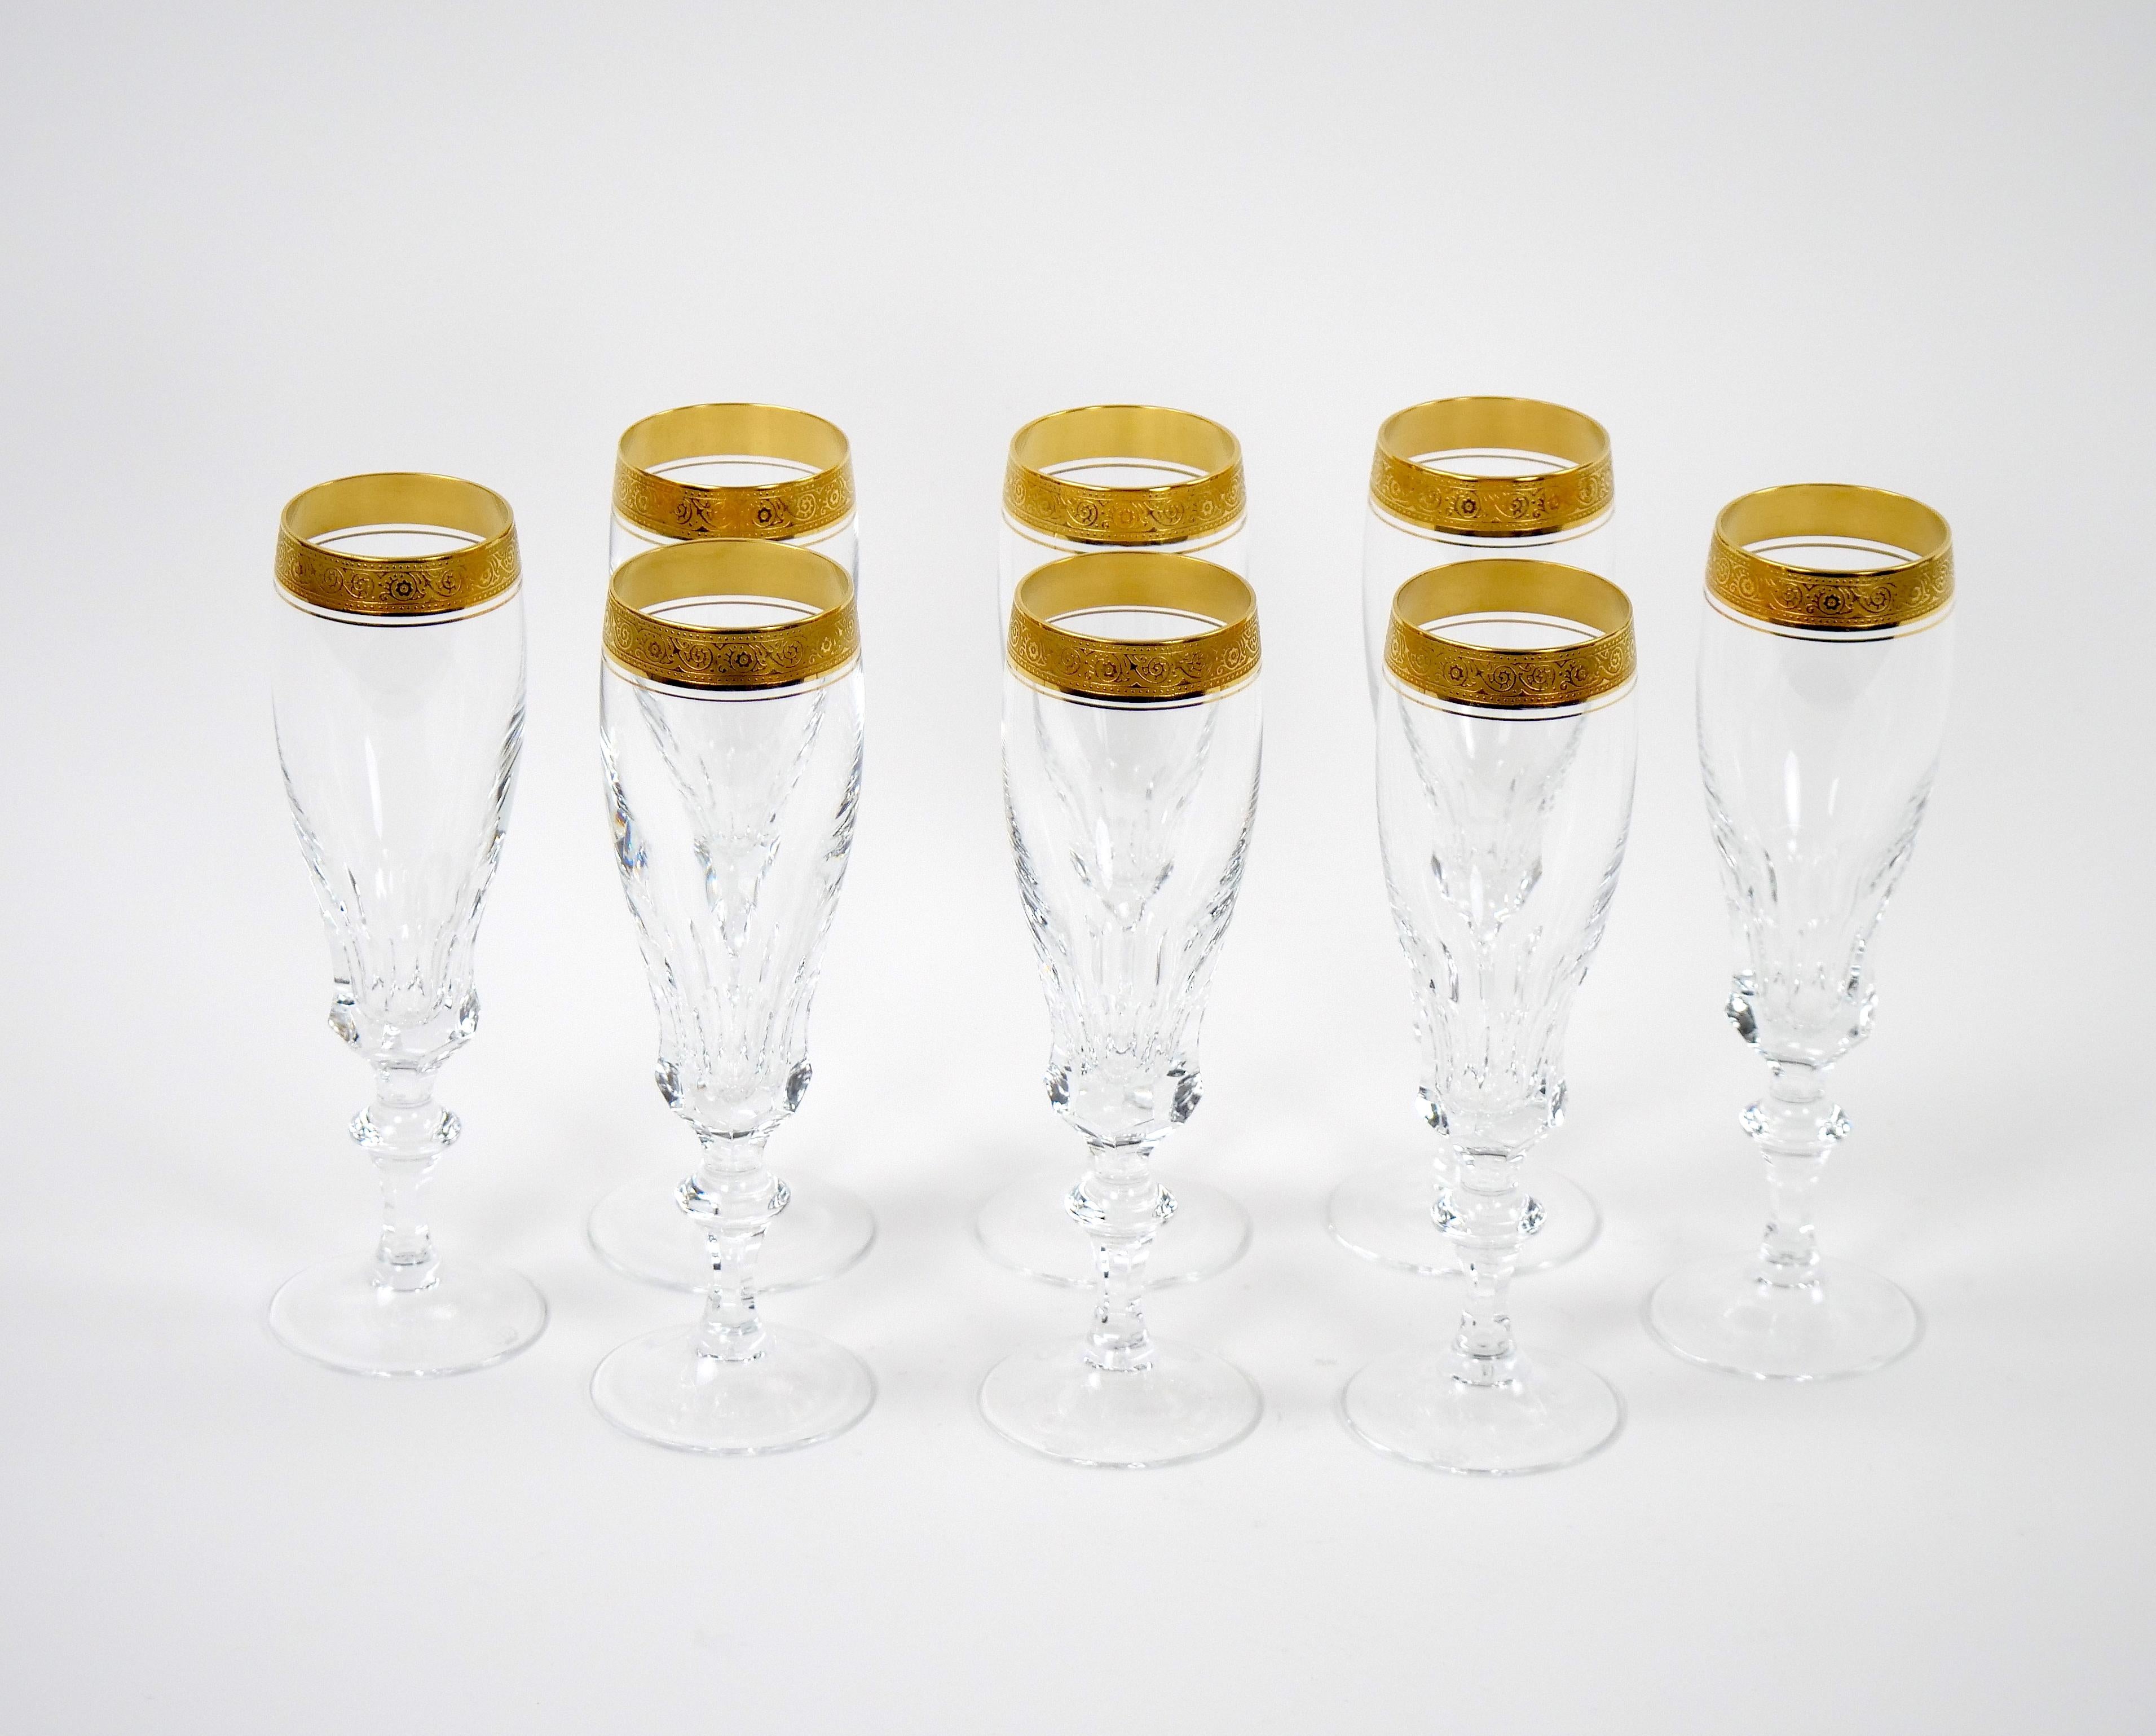 Introducing an embodiment of sheer opulence & refined taste with this meticulously crafted cut crystal tall champagne flute service, a masterpiece that redefines luxury living. Adorned with meticulous double trimmings of gilt gold, each piece